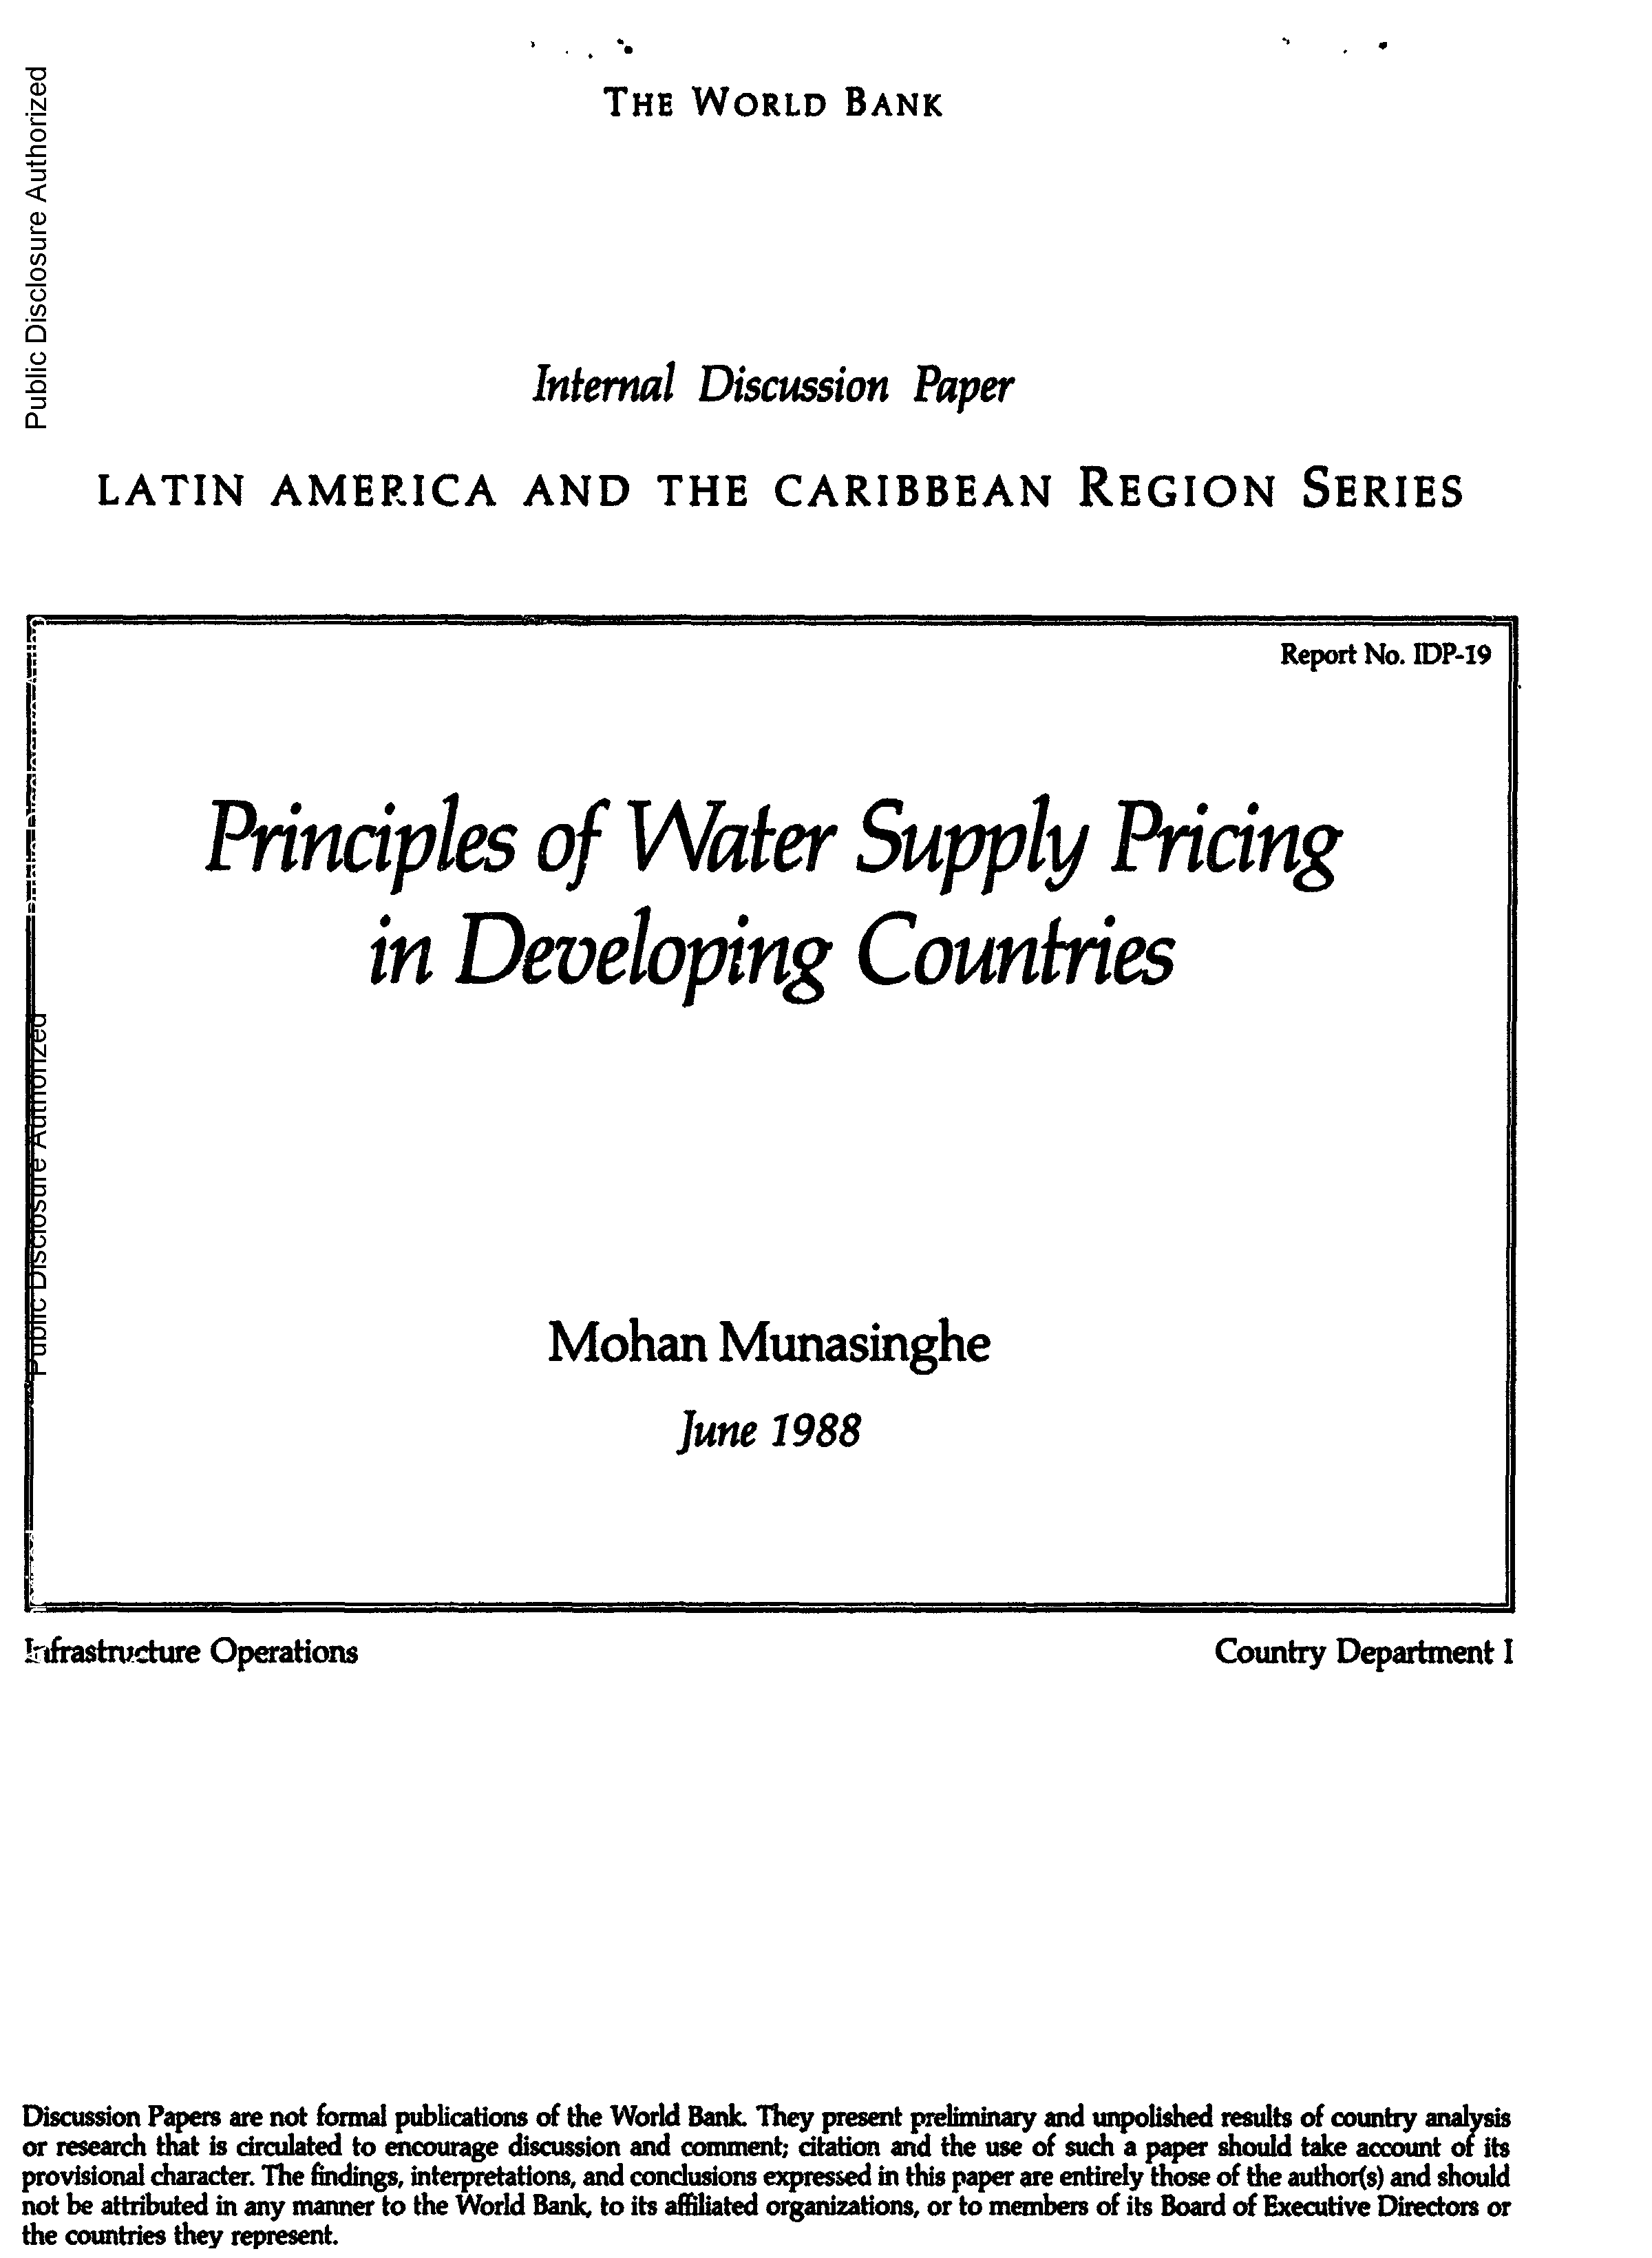 Cover page for Principles of Water Supply Pricing in Developing Countries